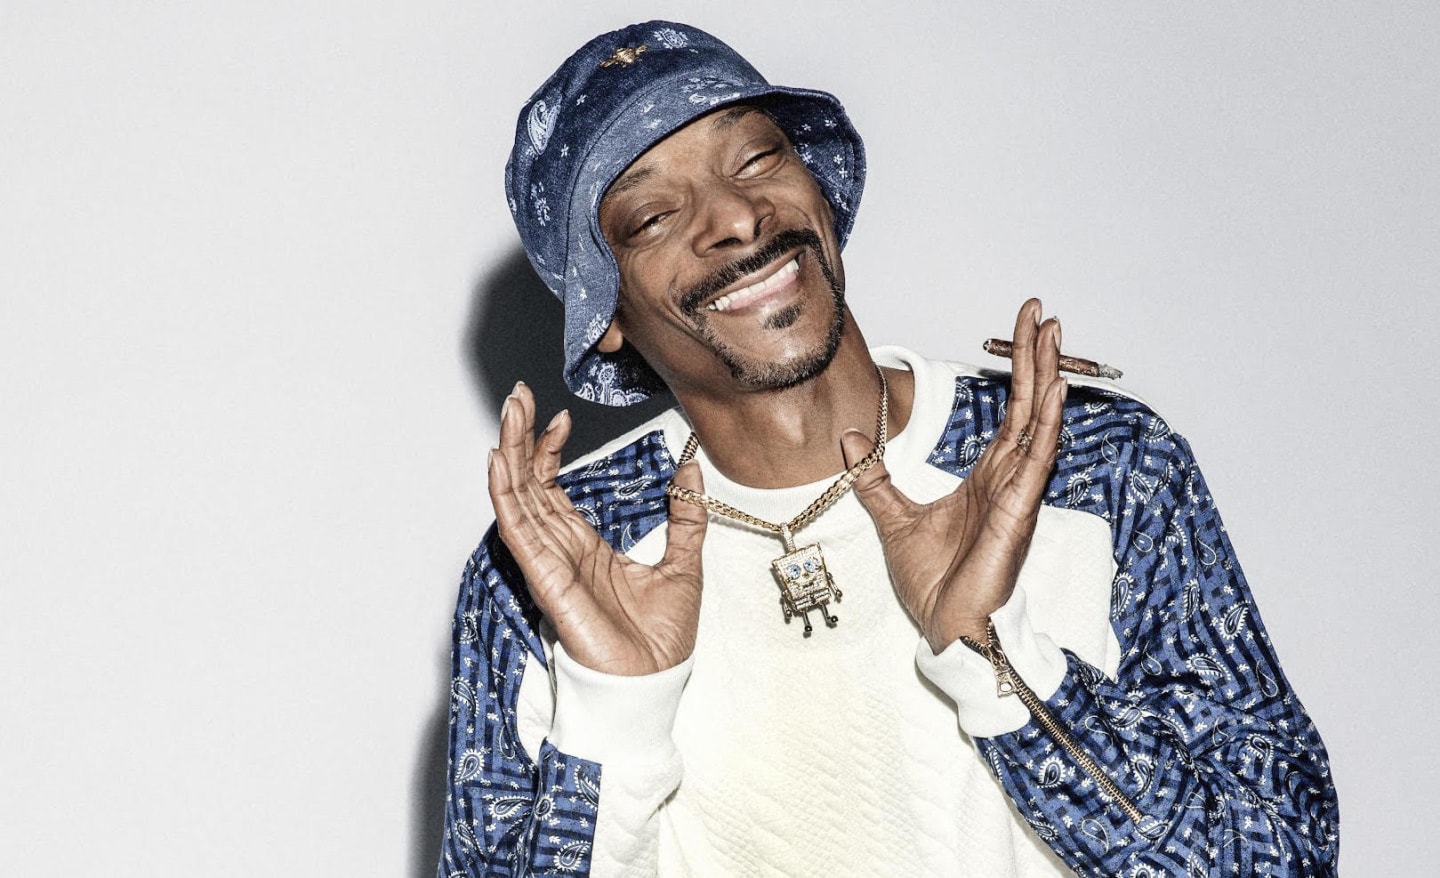 Snoop Dogg's Biography and Early Life